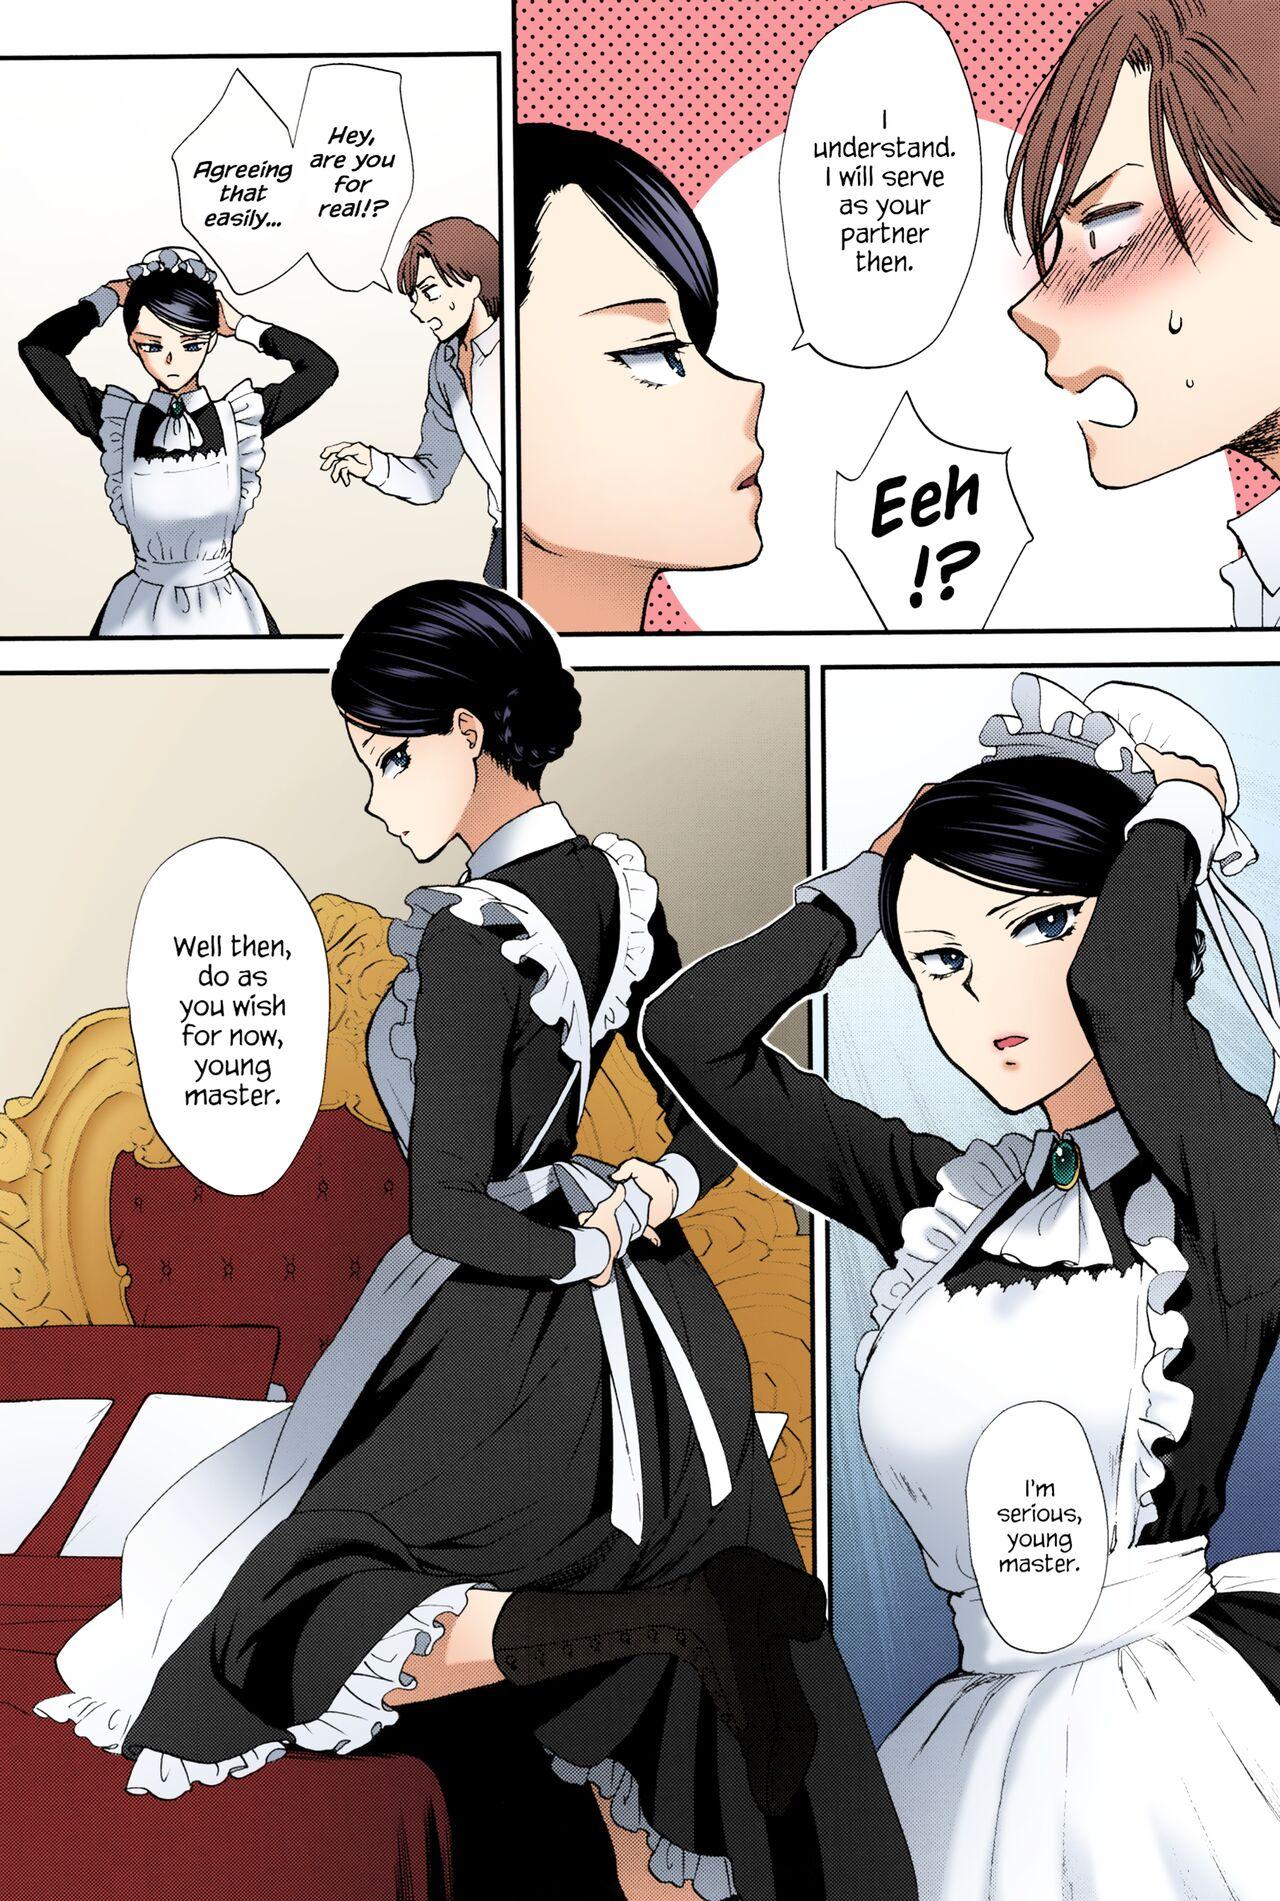 Chudai Kyoudou Well Maid - The Well “Maid” Instructor - Original Thuylinh - Page 6